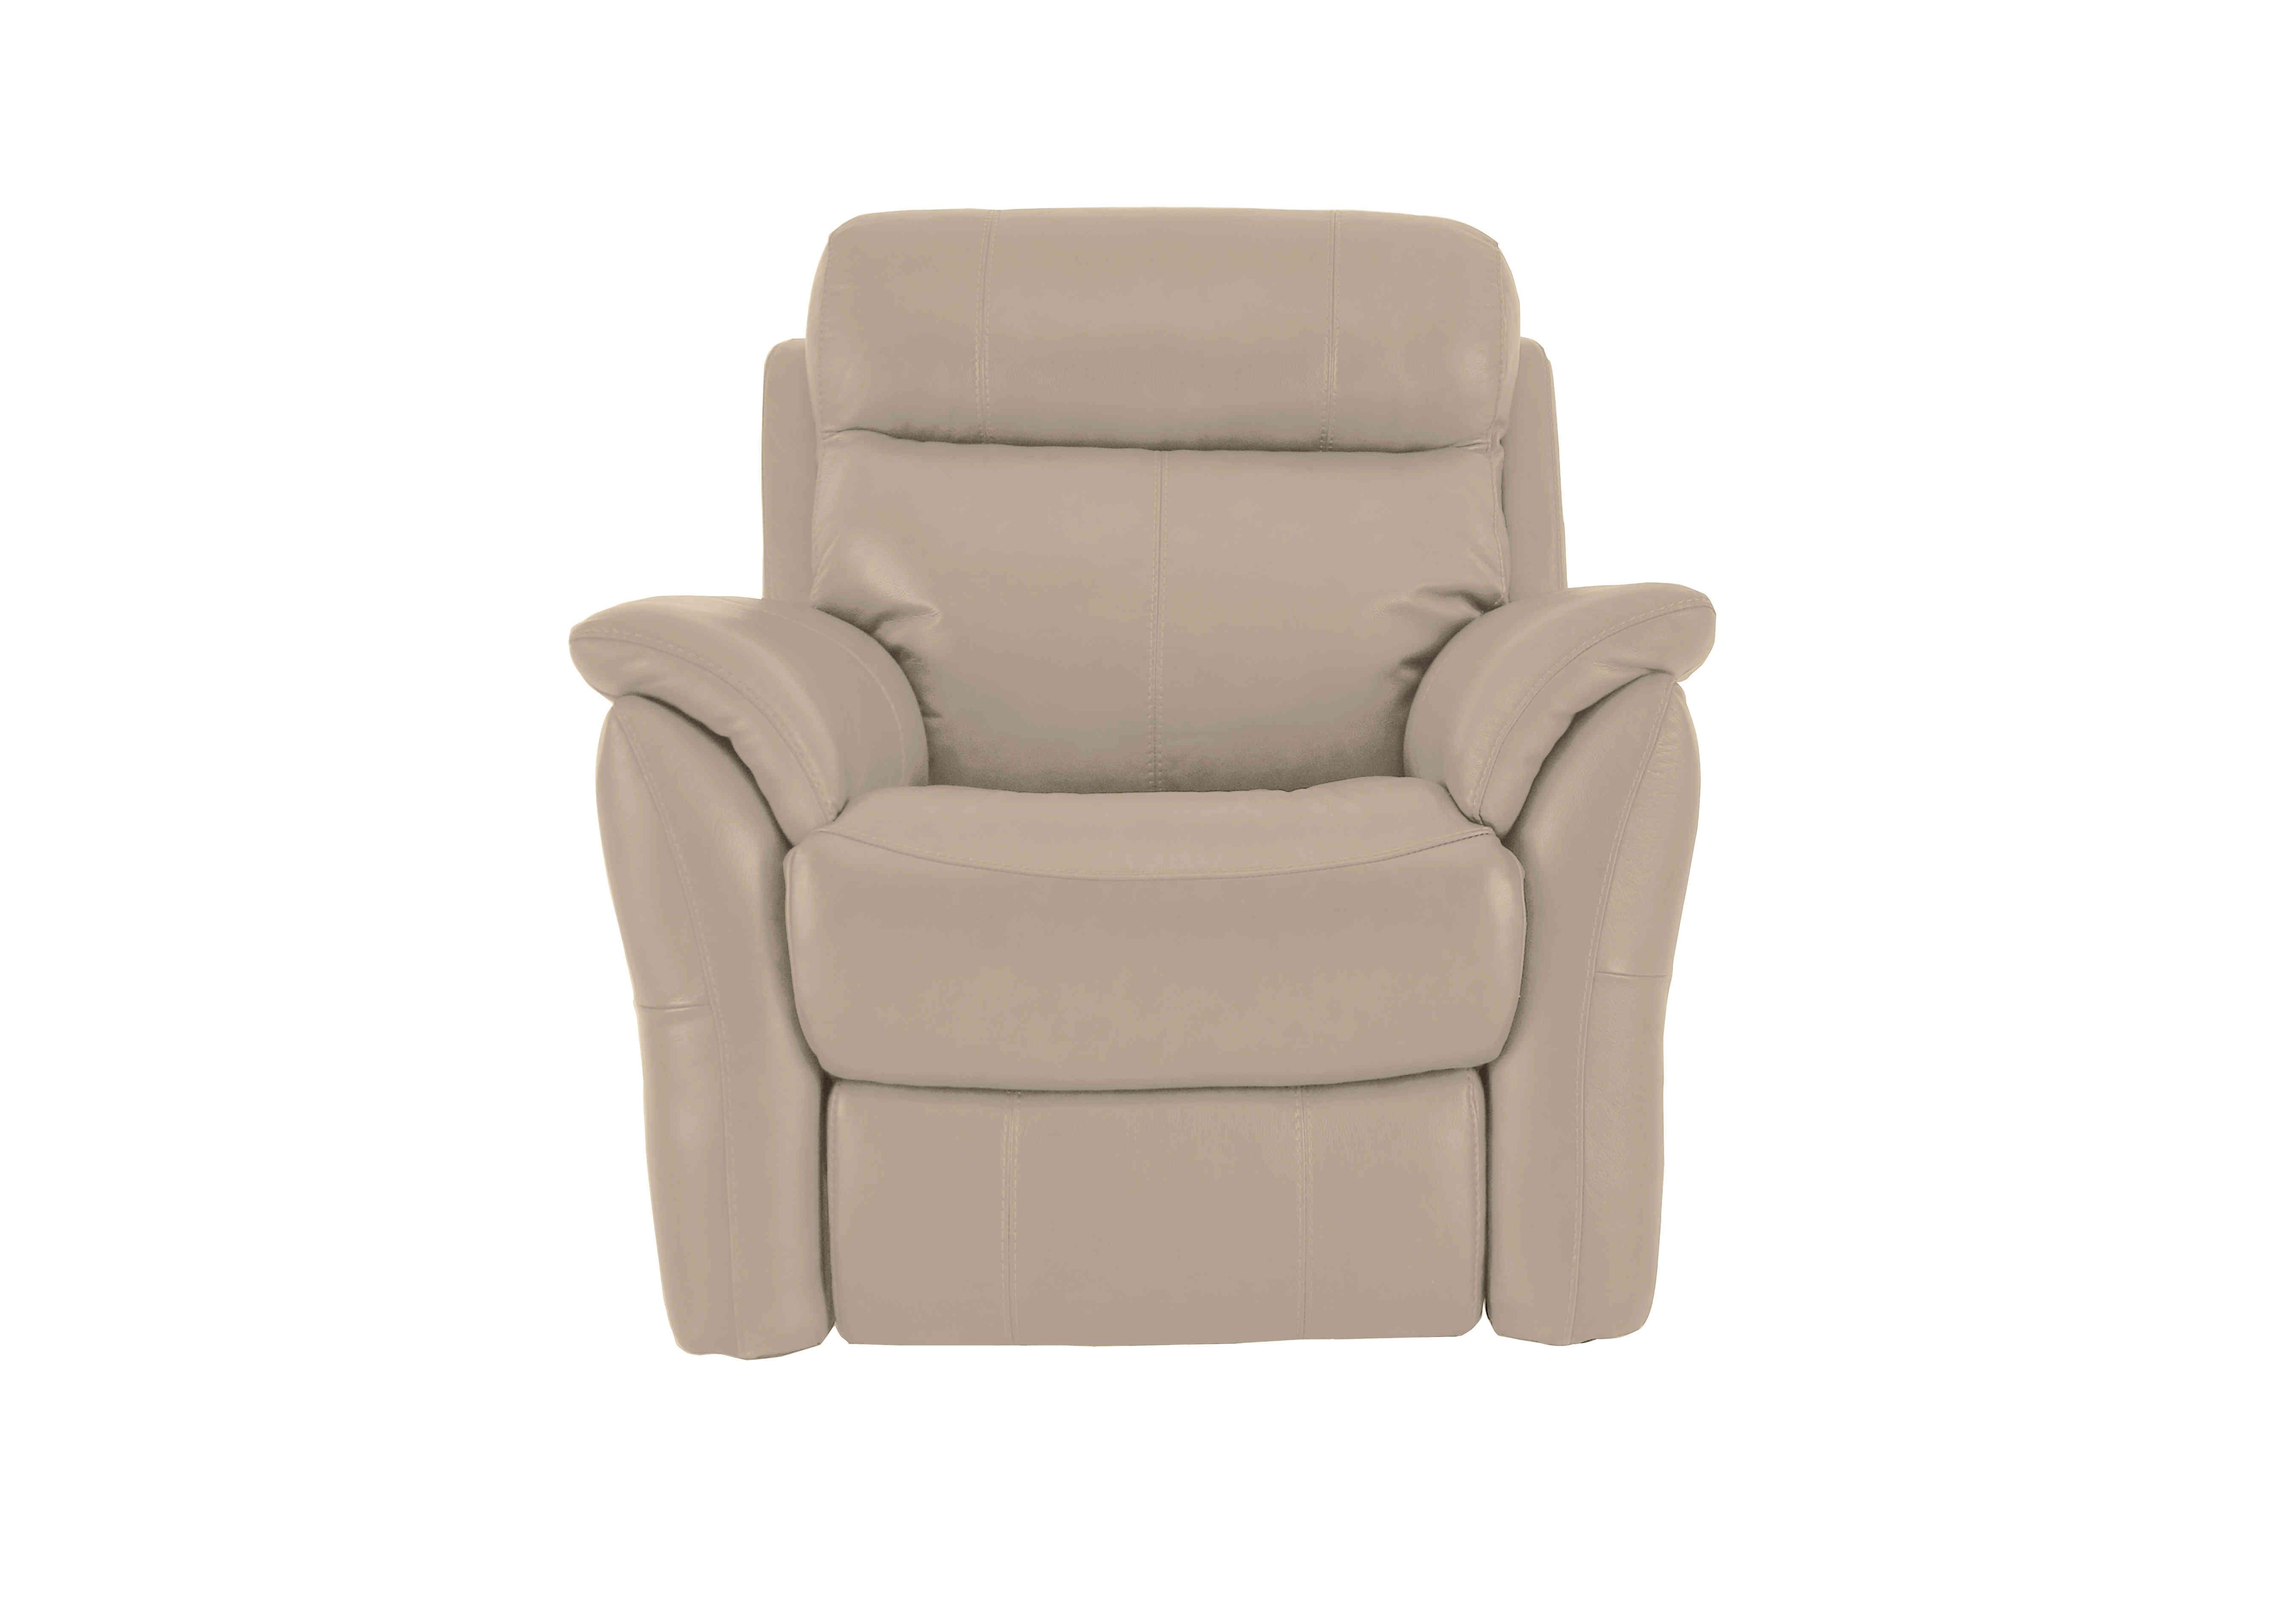 Relax Station Revive Leather Armchair in Bv-039c Pebble on Furniture Village